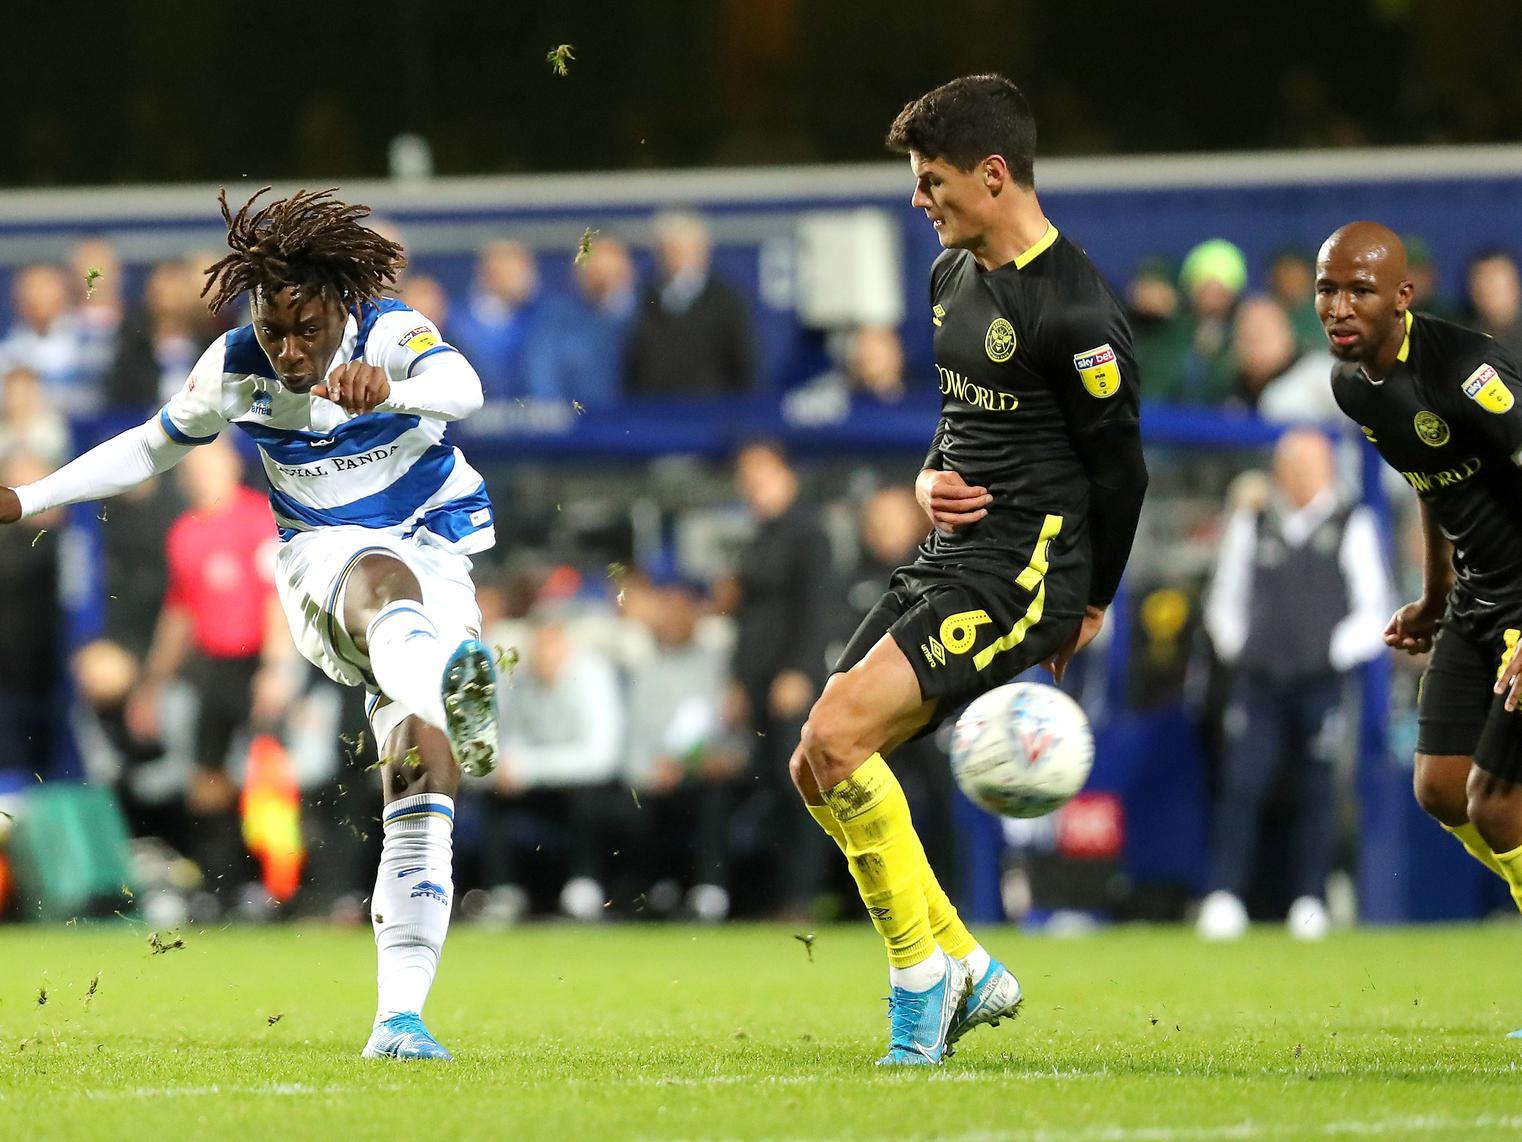 The QPR England under-20s ace again showed his talents at Elland Road on Saturday but he was unable to add to his four assists. Photo by James Chance/Getty Images.